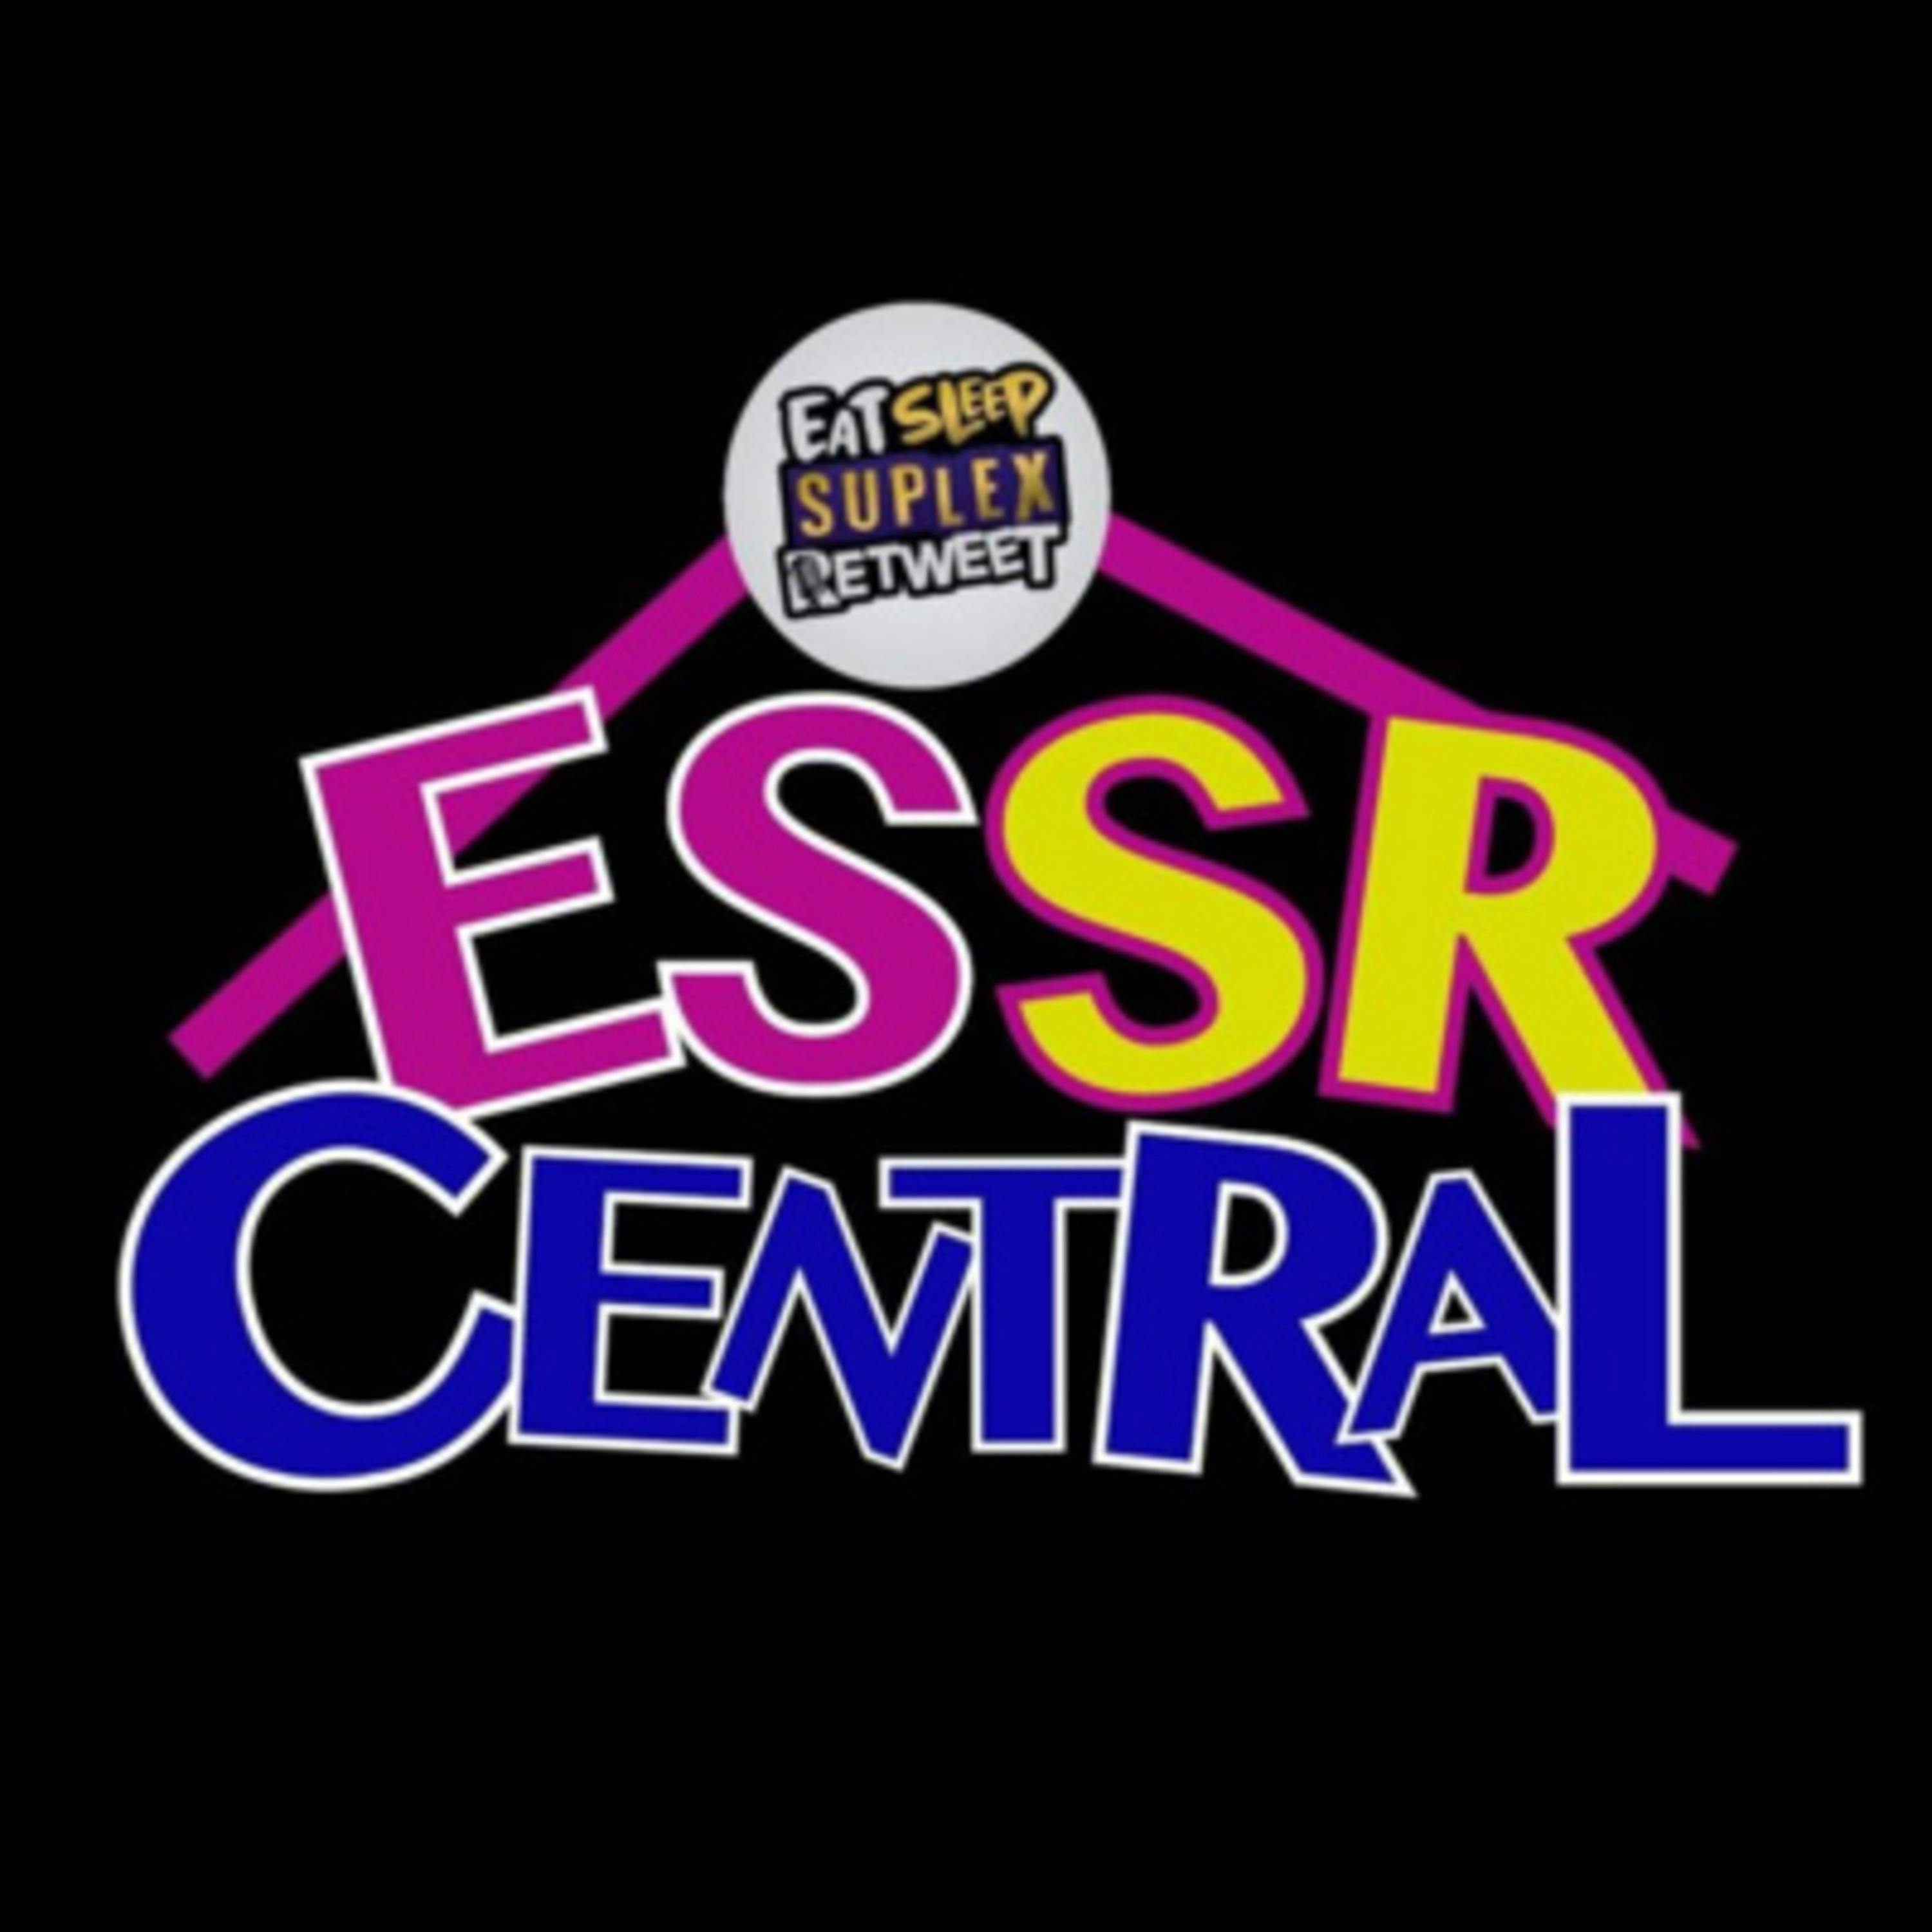 ESSR Central #042 - Uso DUI, Goldmember Black, Great American Bash Review and Breakout Tournament